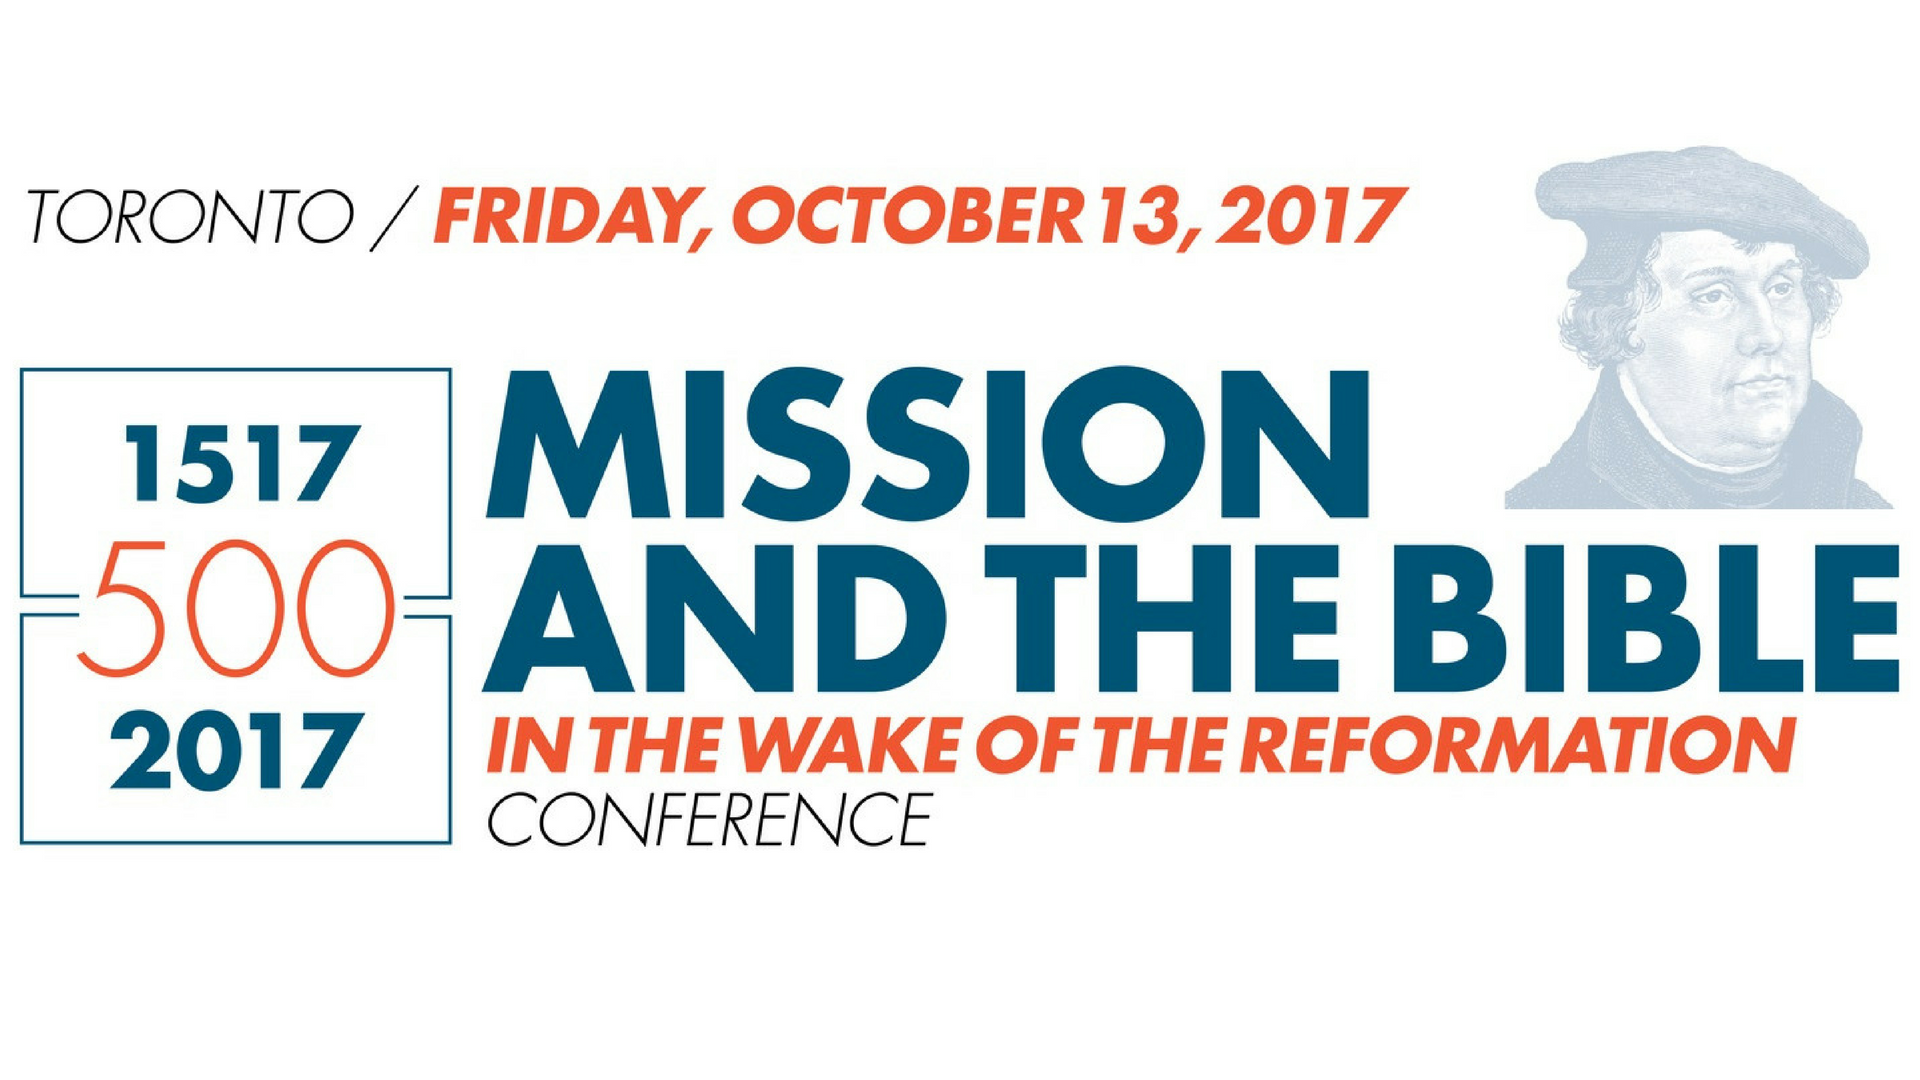 Mission and the Bible in the Wake of the Reformation Conference